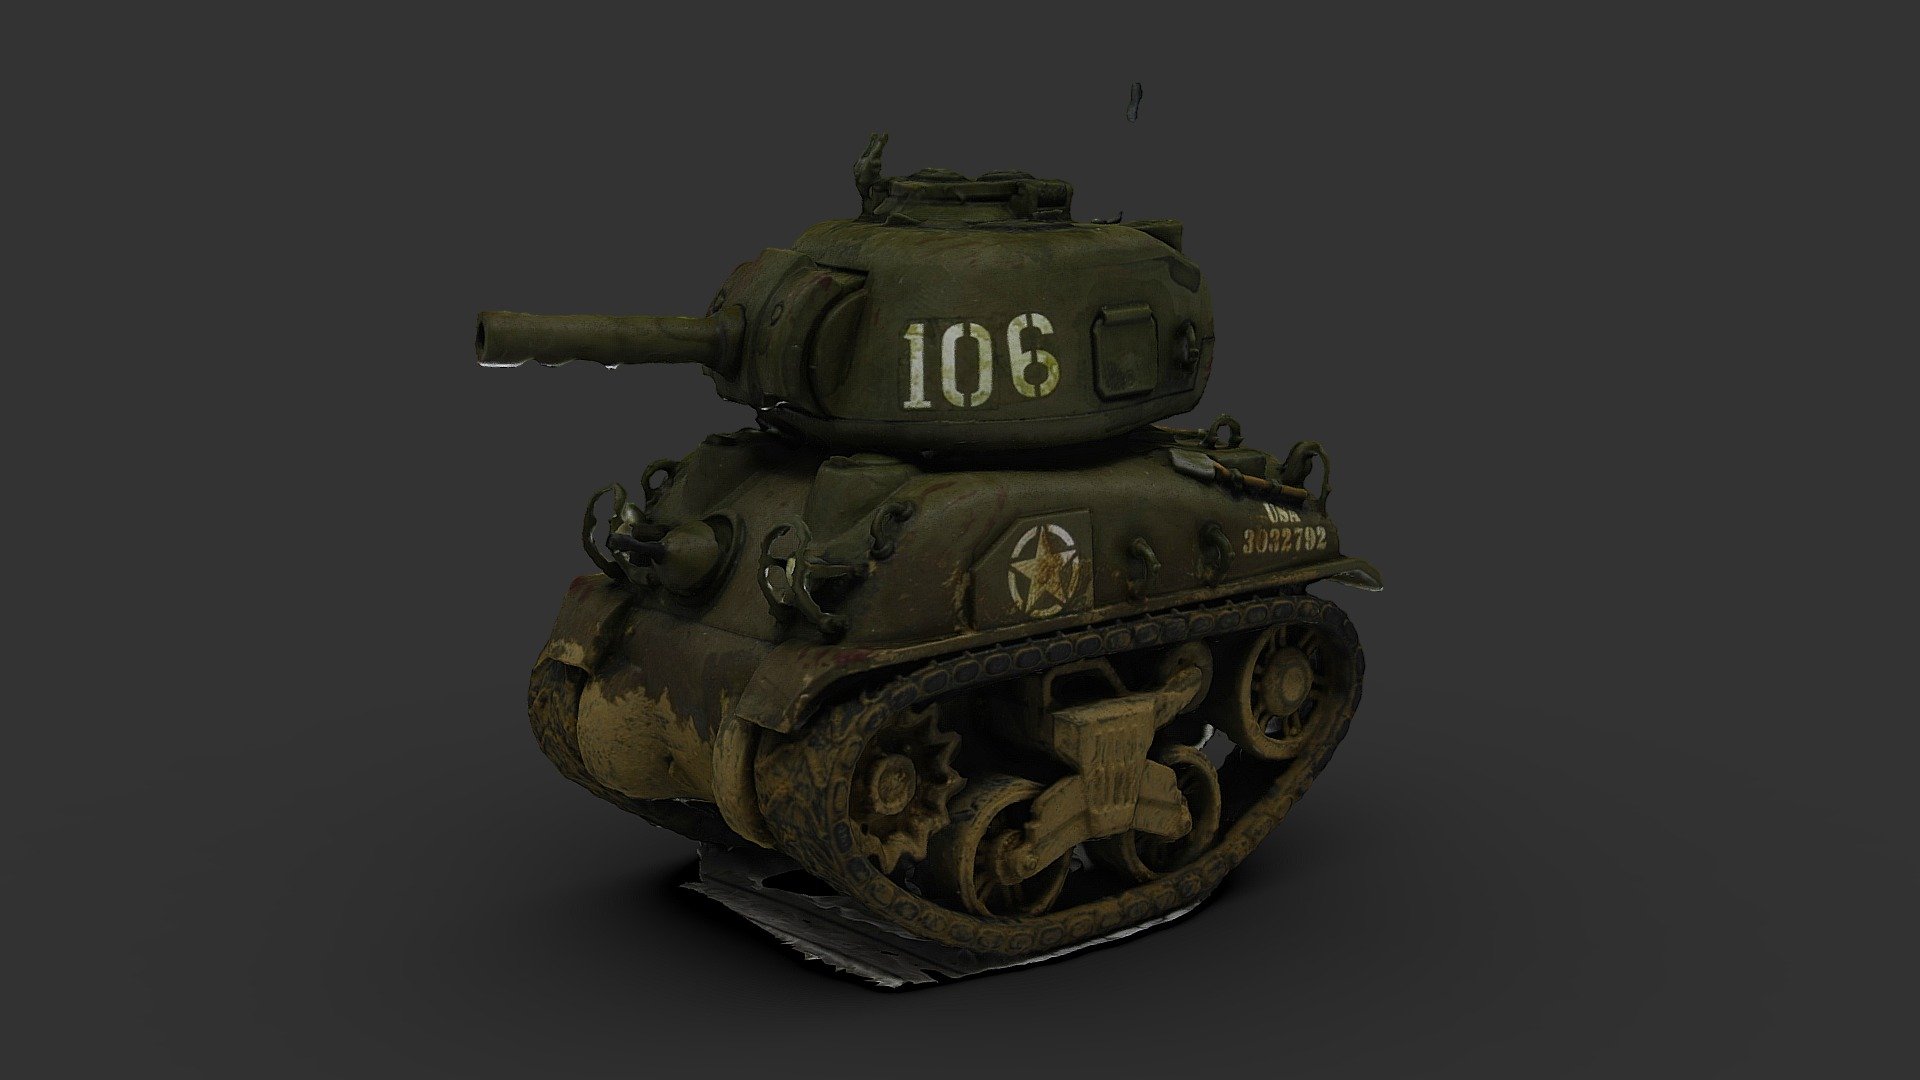 Chibi Tank (Small Scale 3D Scanning Test)